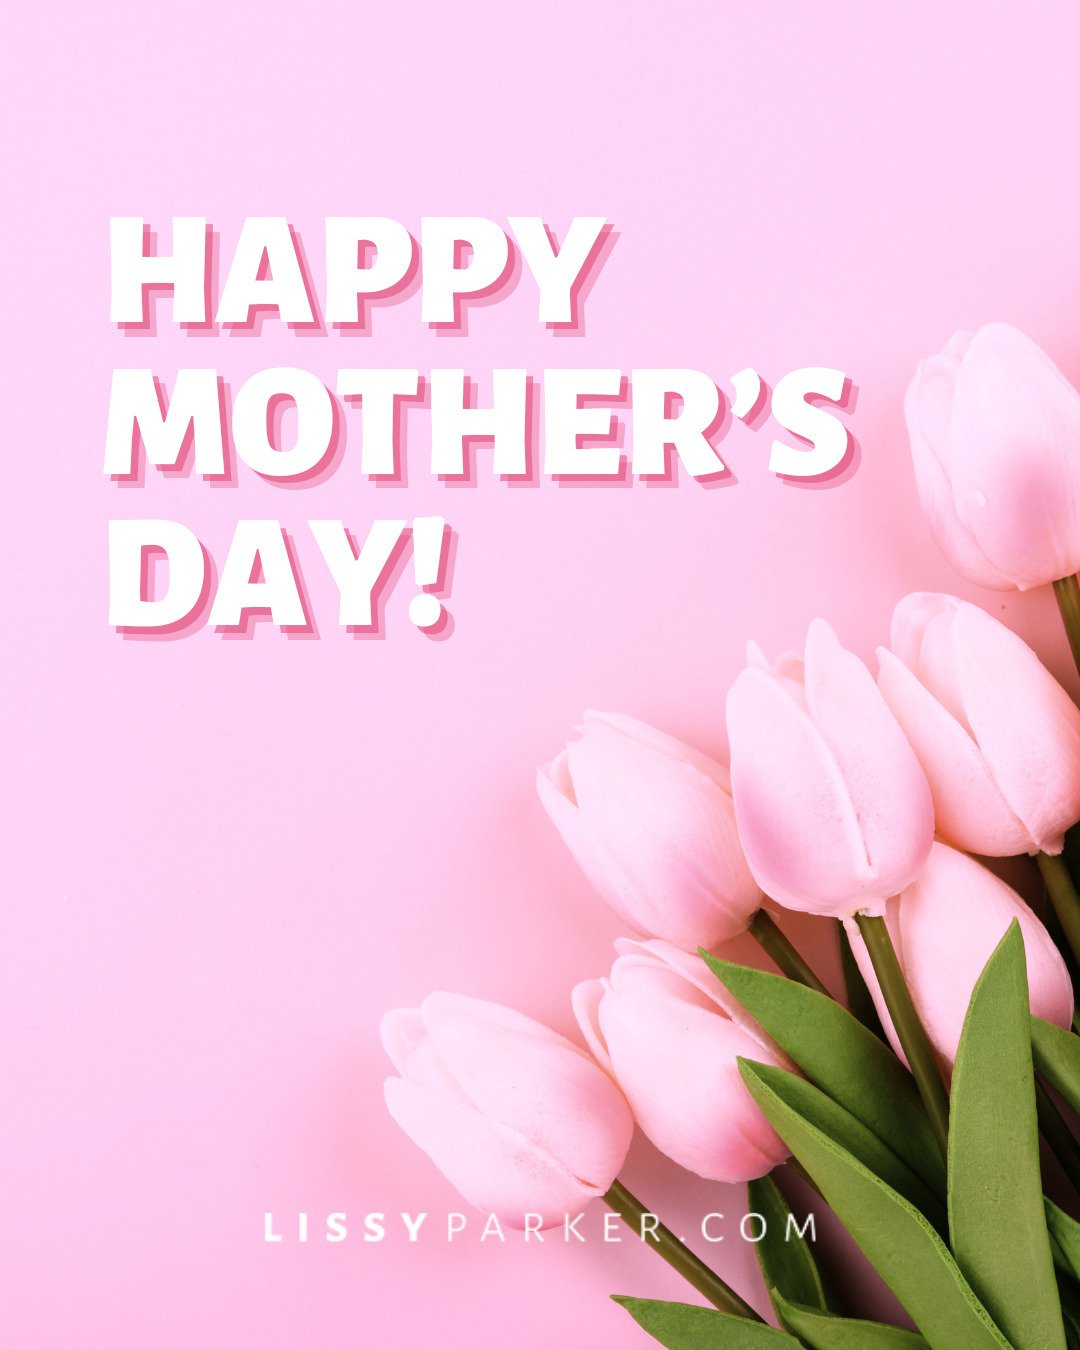 Mother's Day is a reminder that we should cherish and appreciate the incredible women in our lives who have shown us love, kindness, and support. 

Whether it's your mom, grandmother, aunt, or friend, take a moment today to thank them and let them kn